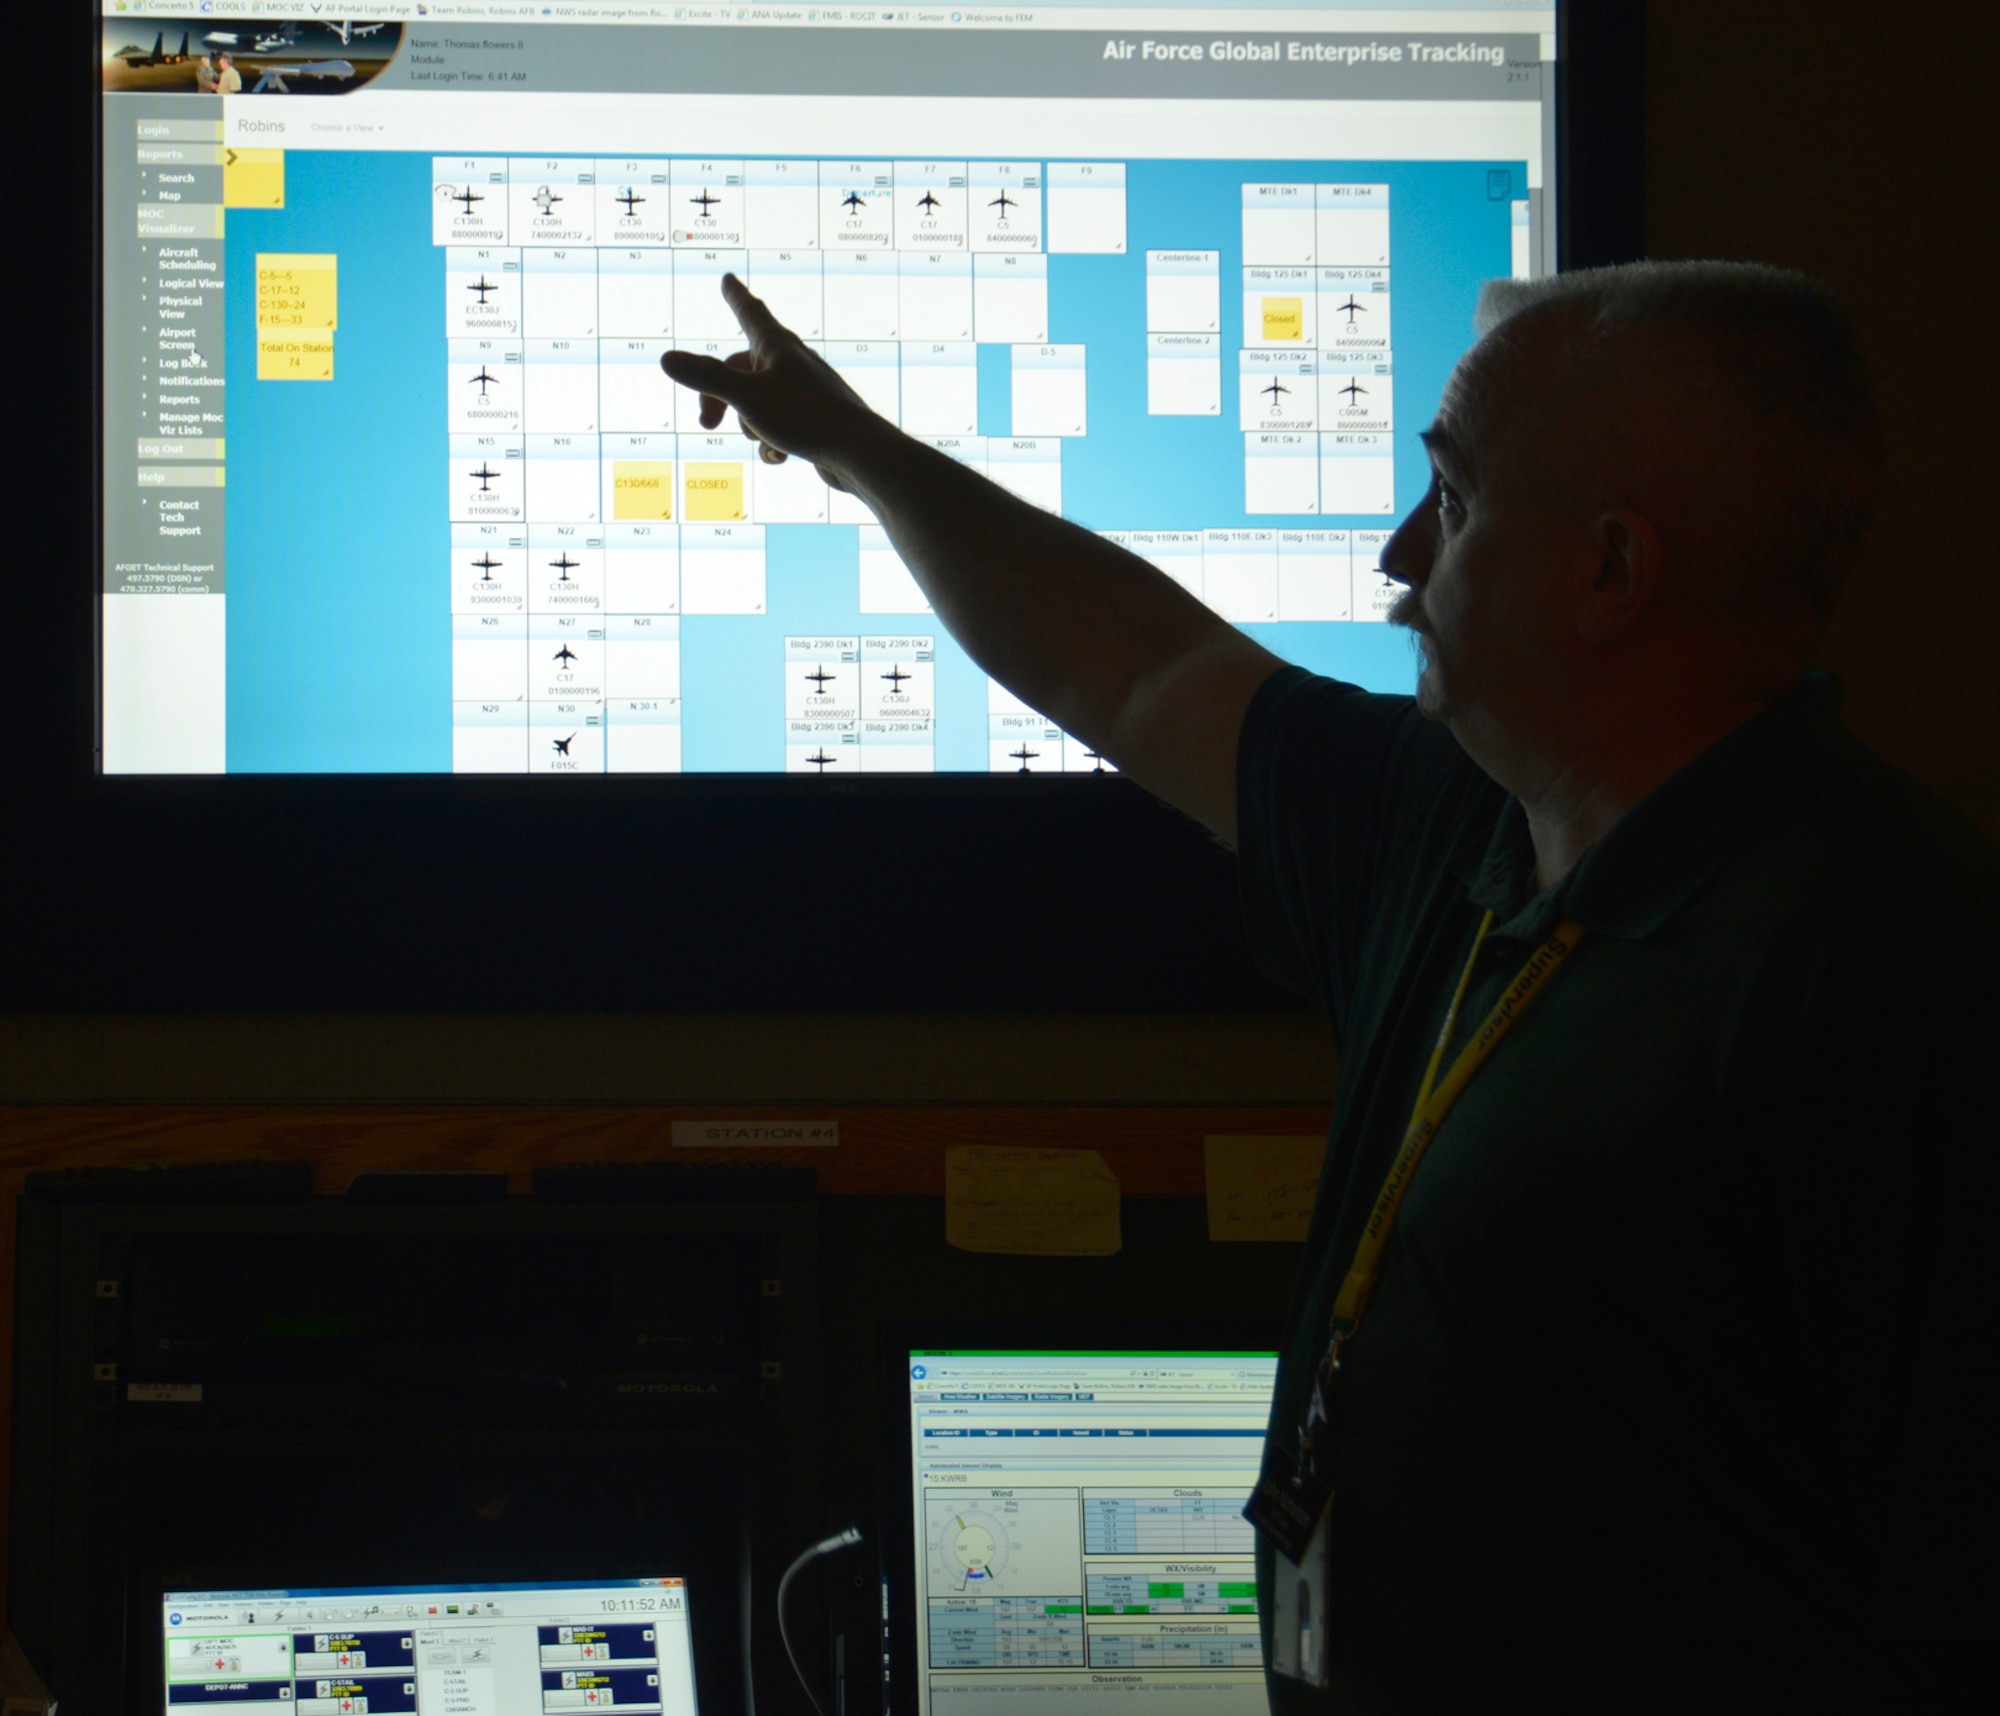 John Nicholson, Maintenance Operations Center chief, shows aircraft locations on the Maintenance Operations Center Visualizer. The MOC is a 24/7 operation that assists efforts on the Robins flight line. The MOC's responsibilities are varied, from supporting maintenance professionals with aerospace ground equipment and tracking injuries and incidents, to alerting personnel of inclement weather and keeping eyes on the locations of every aircraft on station. (U.S. Air Force photo by Ed Aspera)